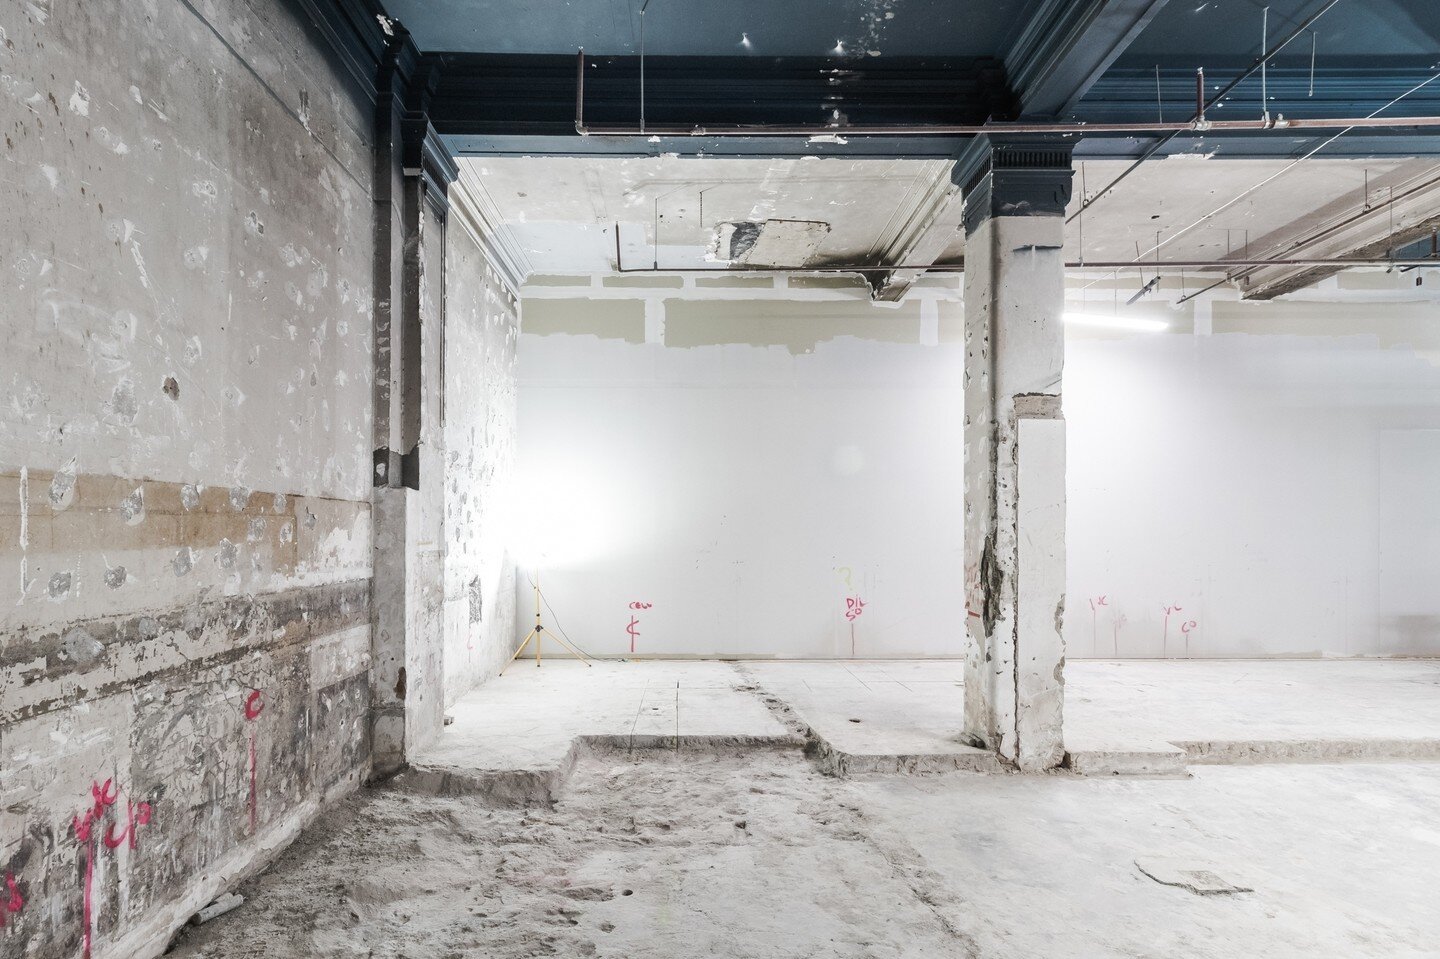 TC Beirne &amp; Co Building ||| Soon to be Enixr Built.⁠
⁠
Enixr will be completing a full renovation on the historical building to transform the space into a new Police Beat for the Fortitude Valley. ⁠
⁠
______⁠
#brisbaneconstruction #brisbanebuilde